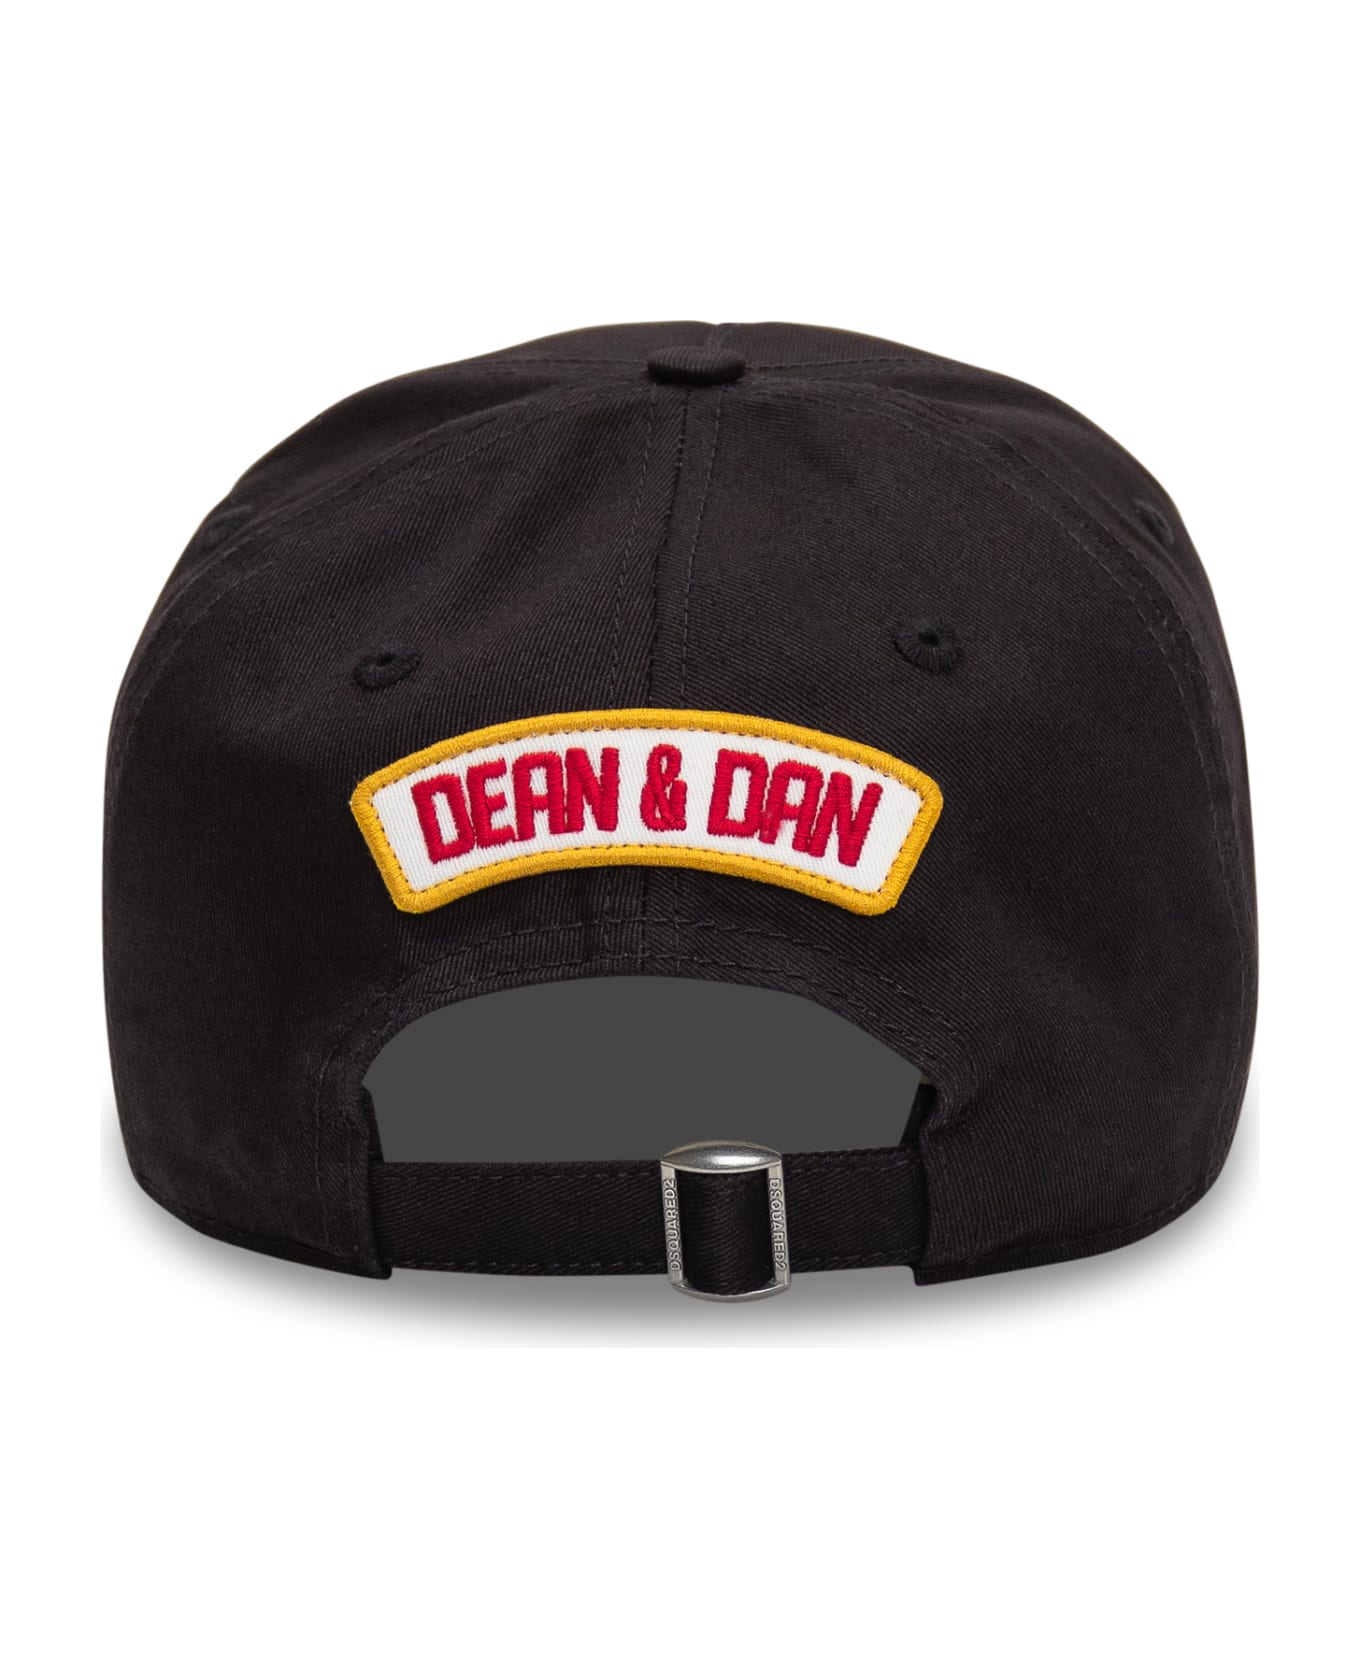 Dsquared2 Black Baseball Cap With Patch - Black